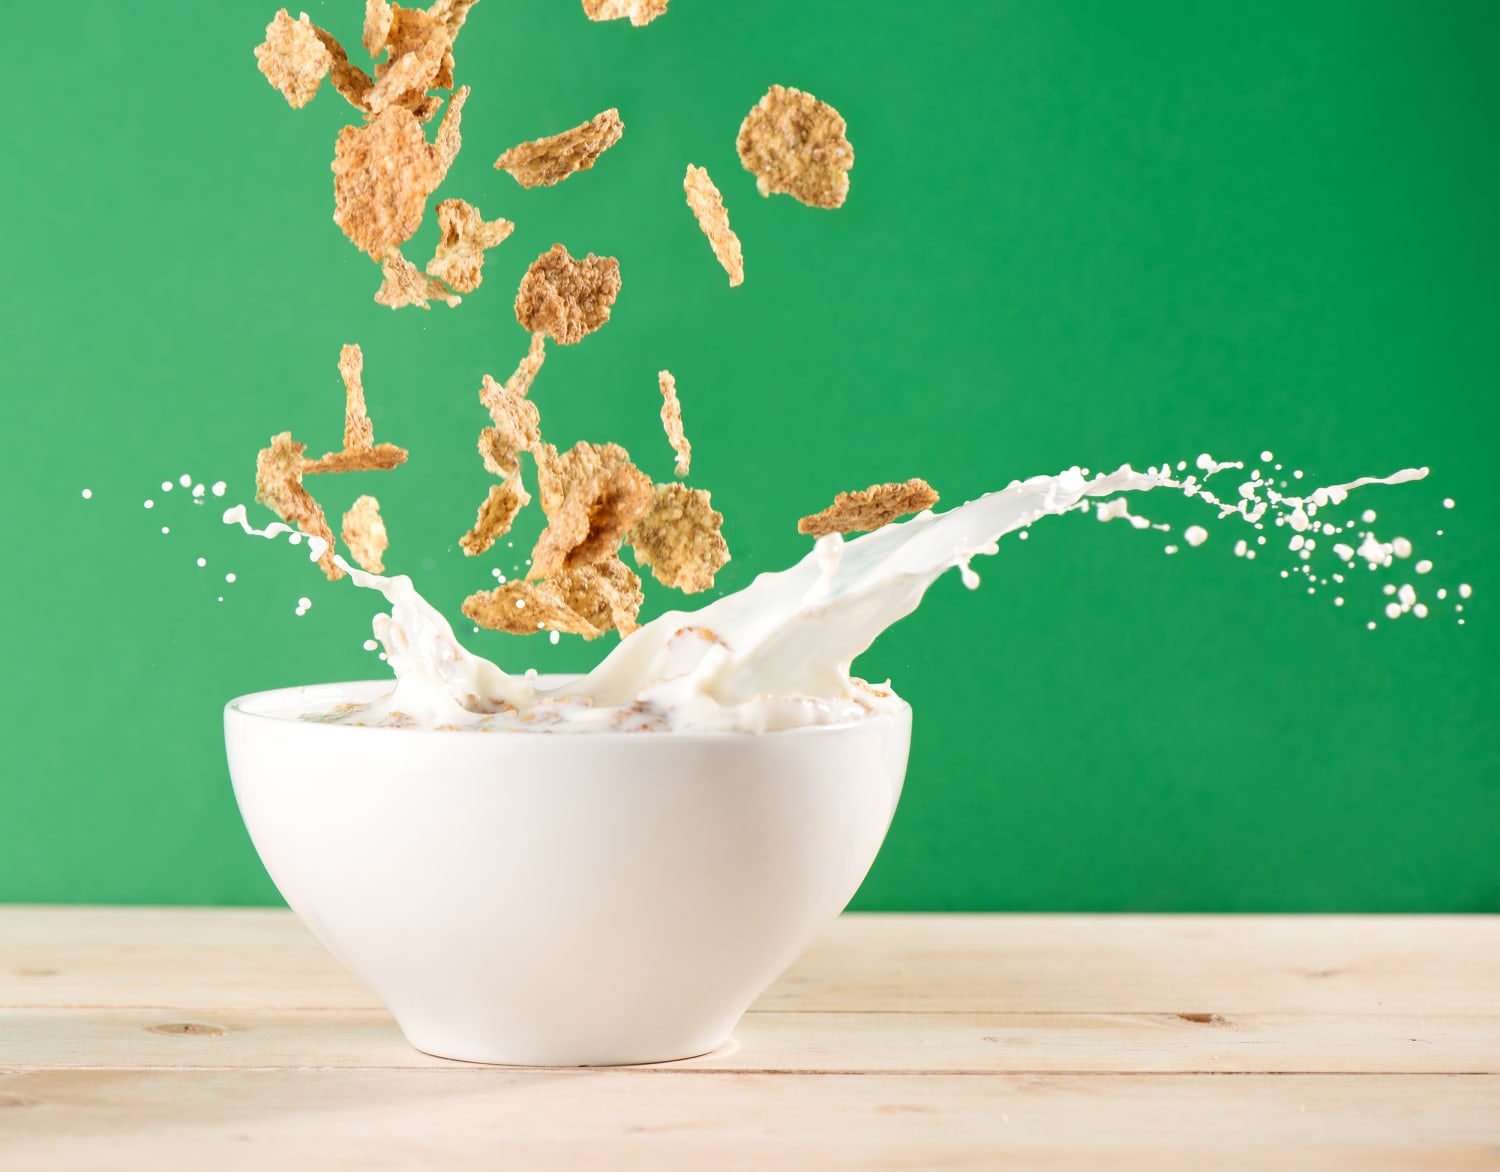 What is the healthiest cereal to eat? Fiber-rich, nutritious options.